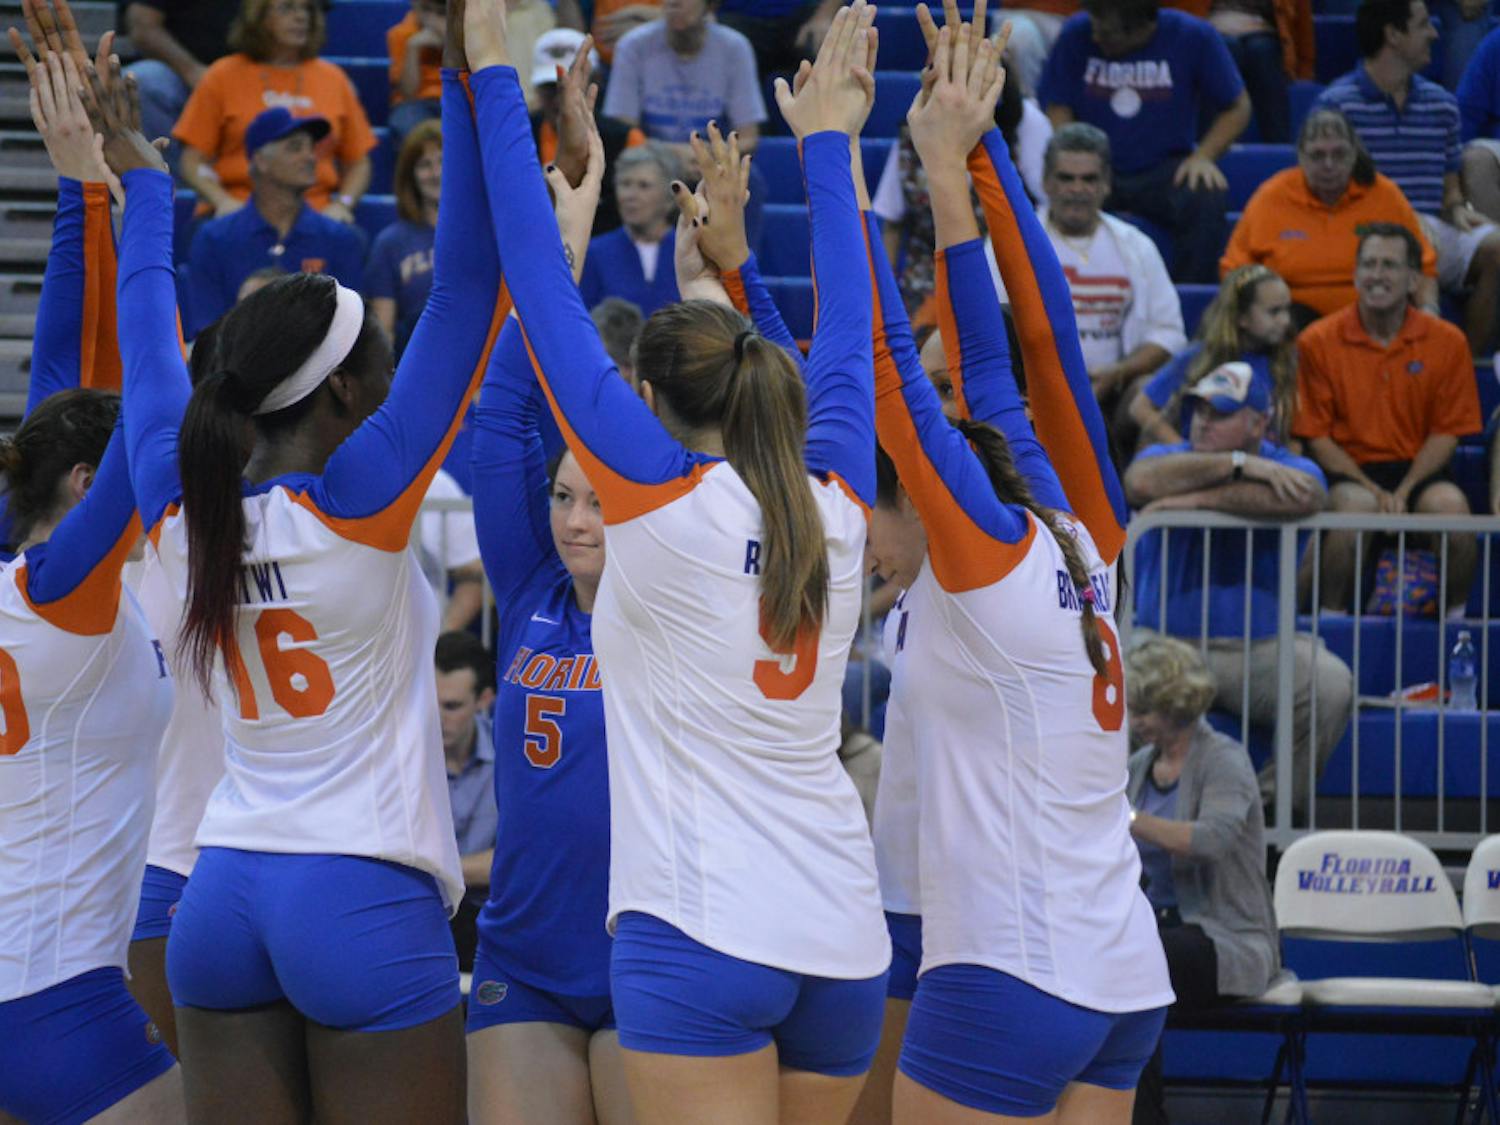 The Florida volleyball team huddles prior to its 3-2 loss to Florida State in the second round of the NCAA Tournament. Florida opens its season today against Georgia Southern in the Active Ankle Challenge.